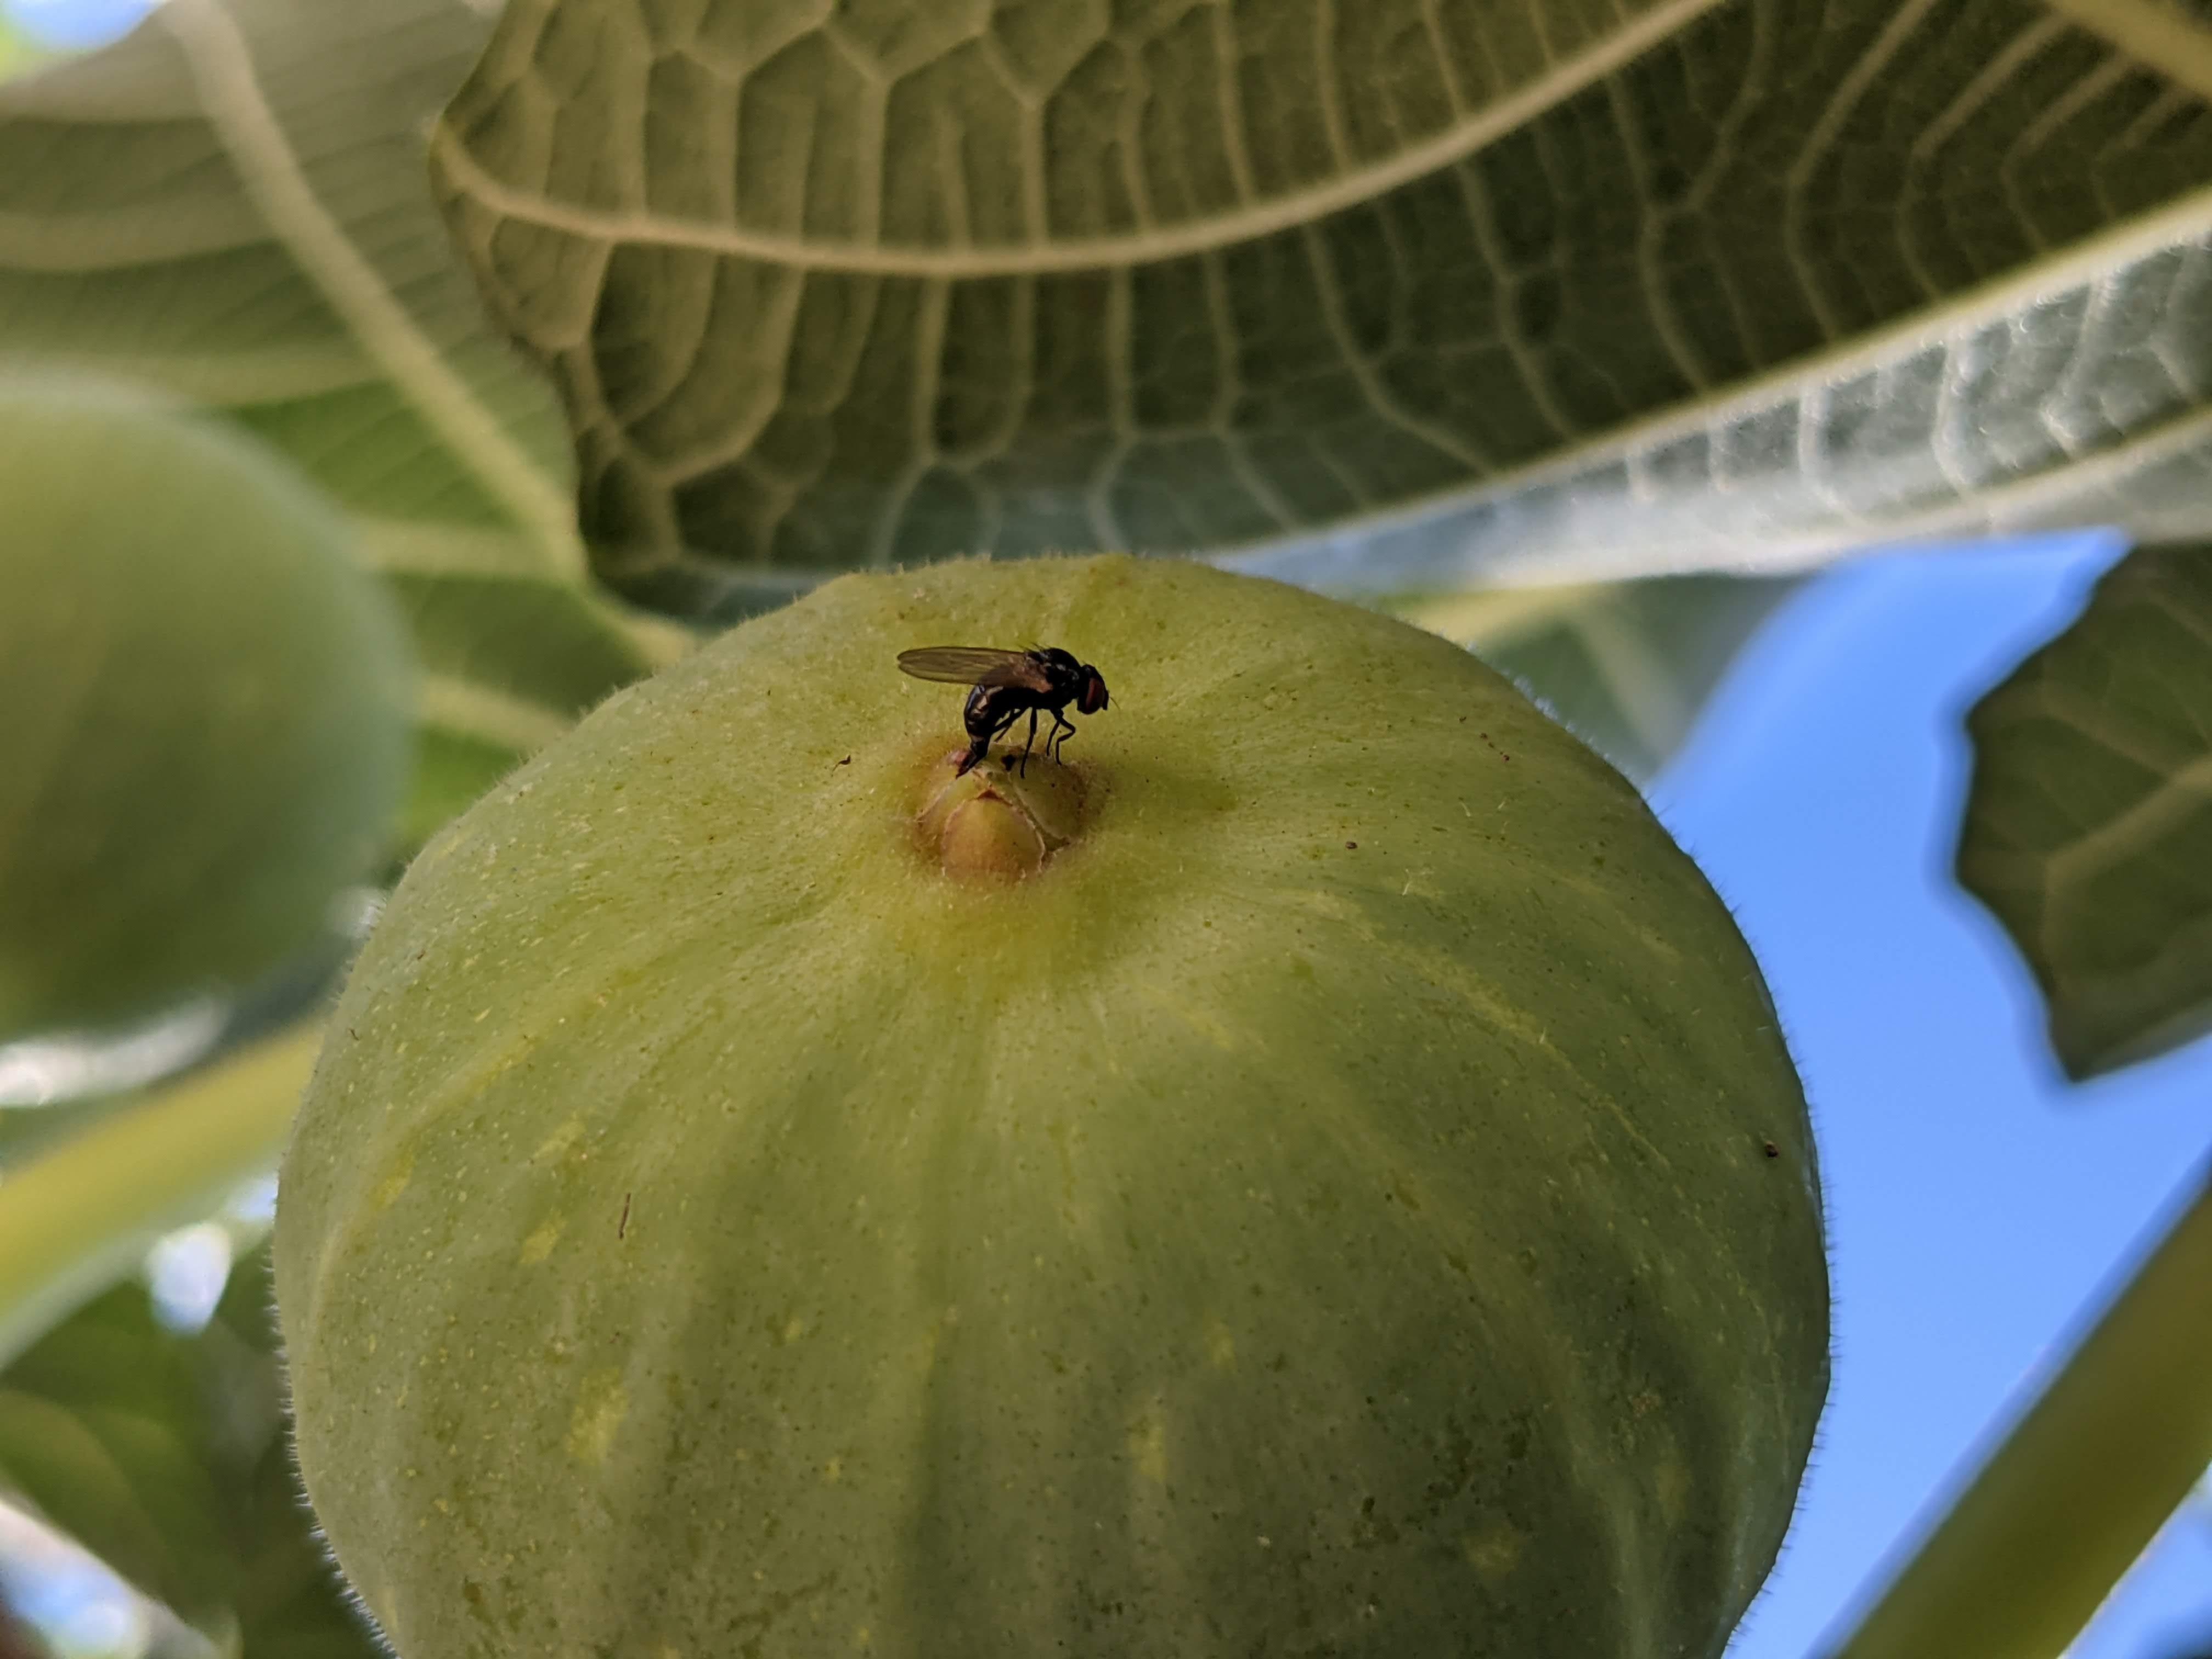 Adult female black fig fly depositing eggs into the fig ostiole (photo: H. Wilson)